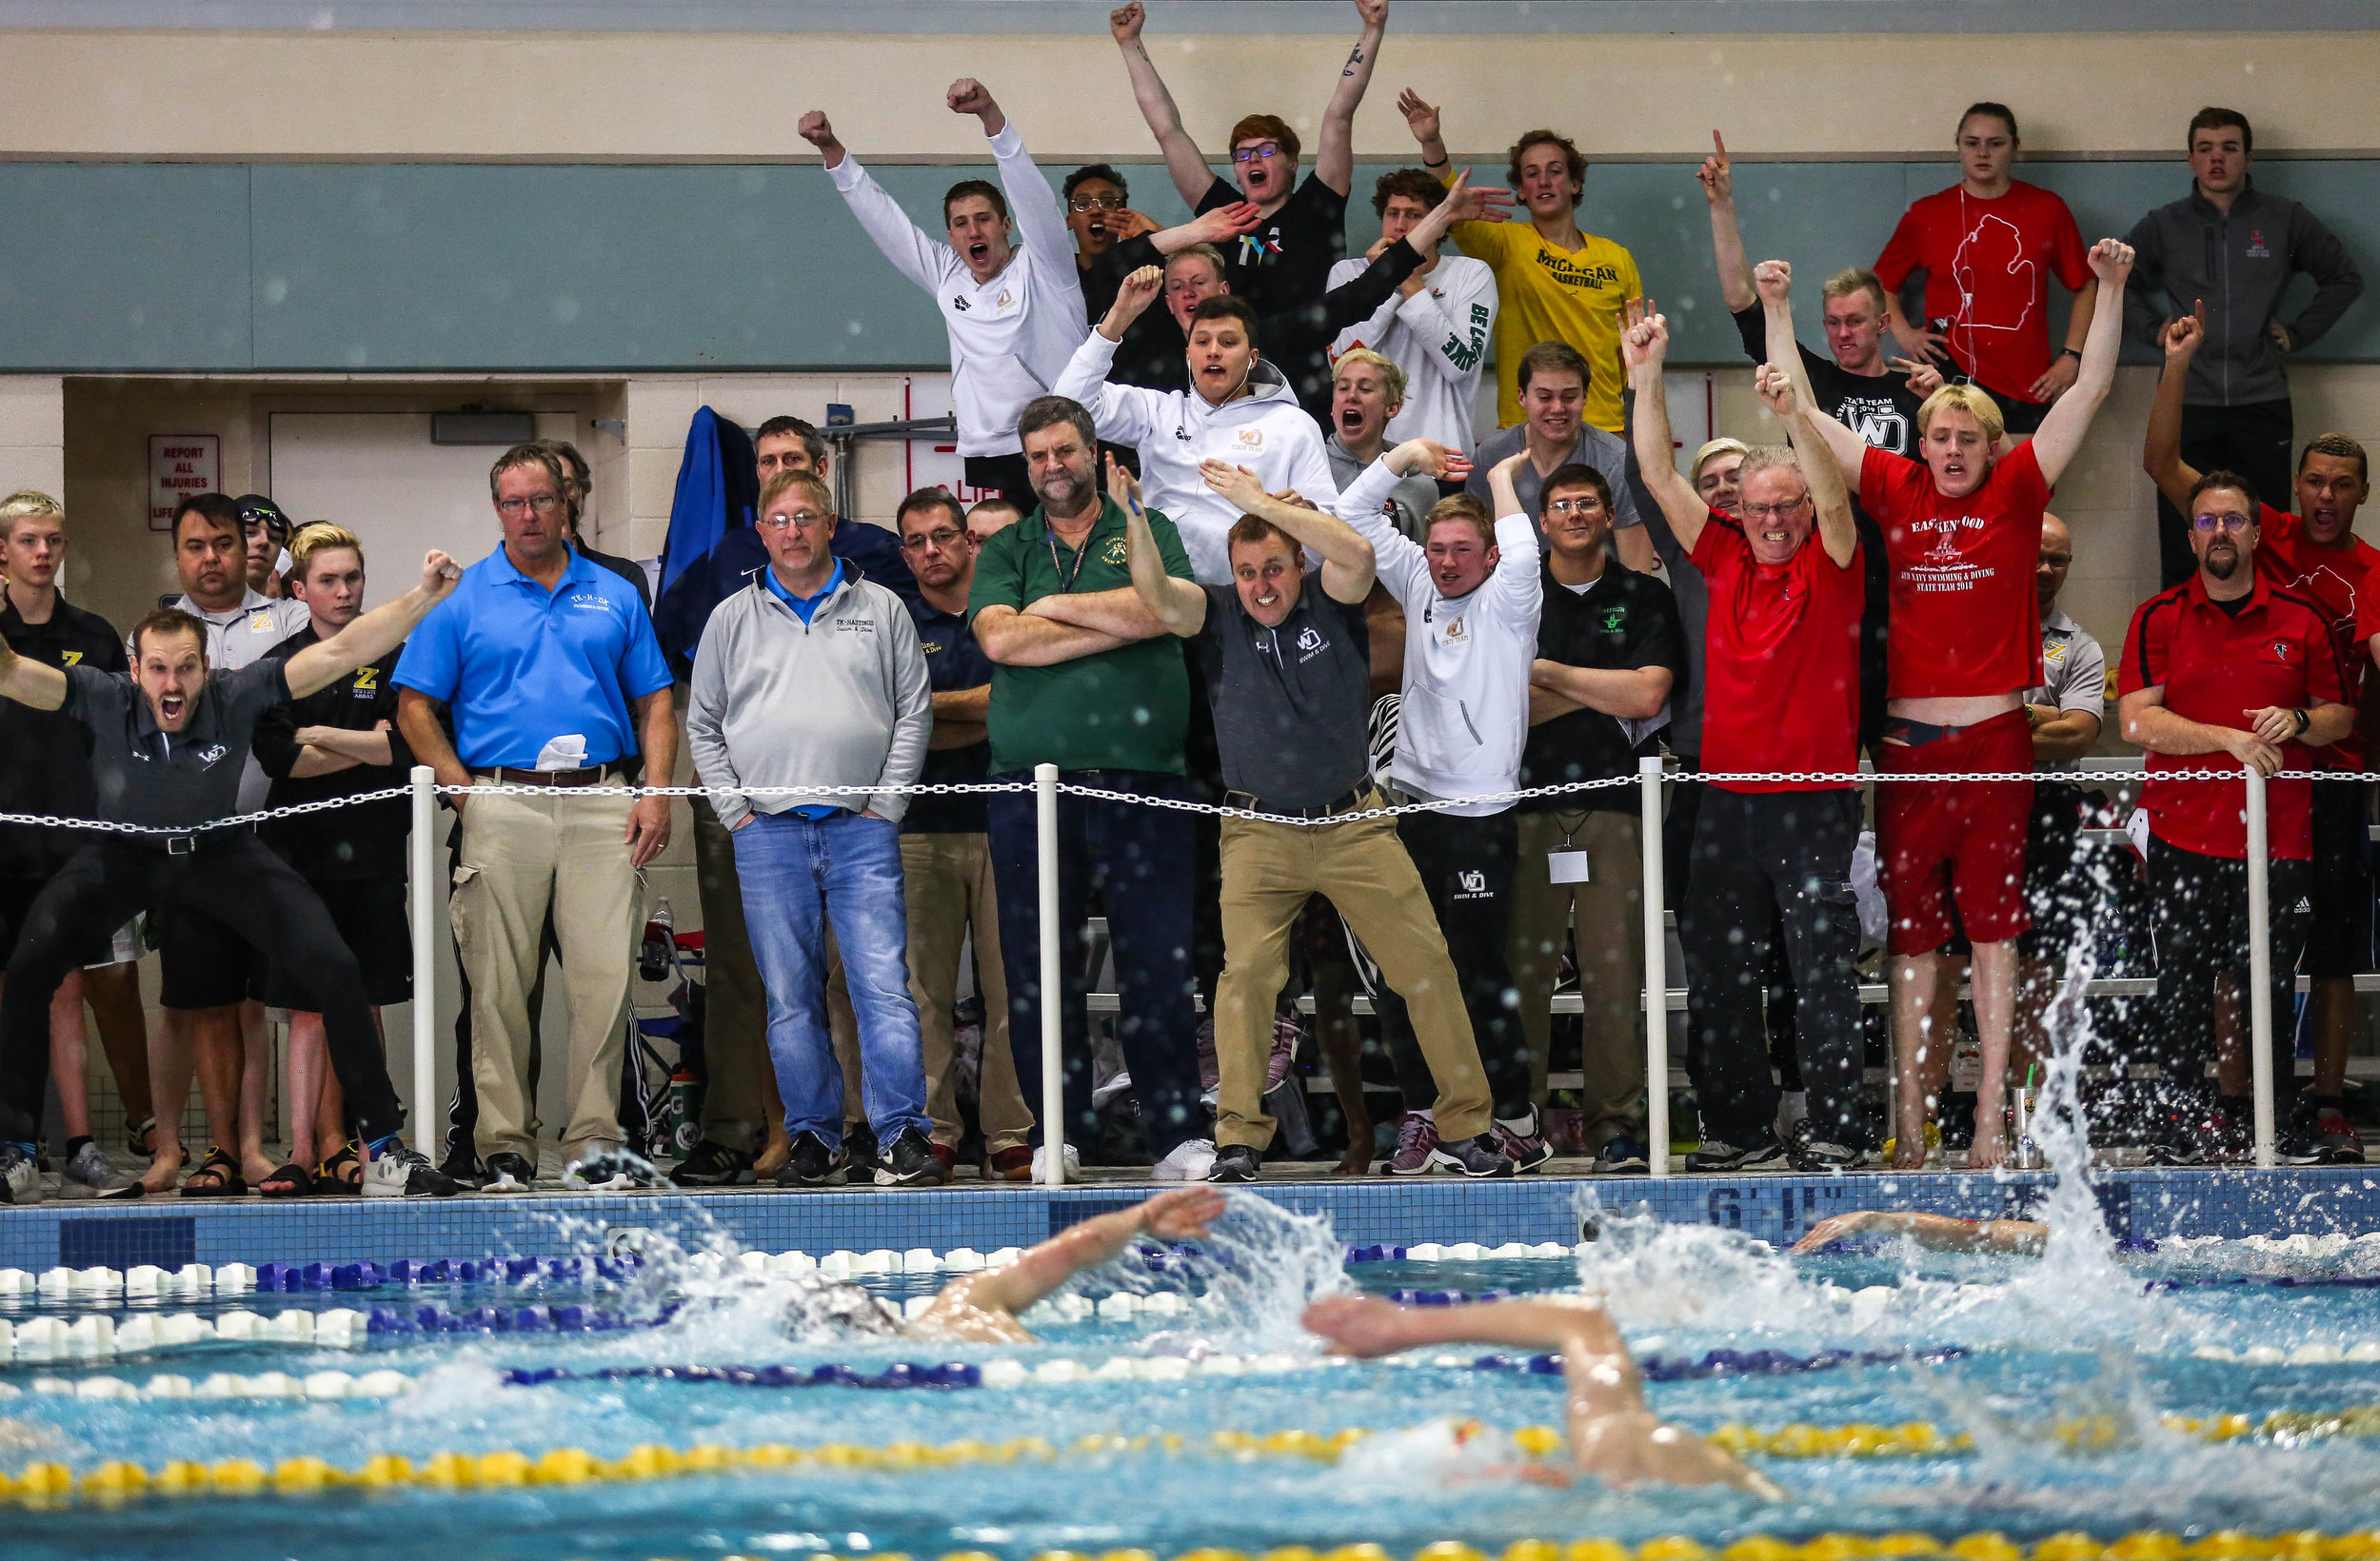  Multiple teams cheer on their swimmers in the boys 500-yard freestyle competition during Saturday’s Division 1 boys swimming state finals at the Holland Aquatic Center in Holland, Michigan on March 9, 2019. 